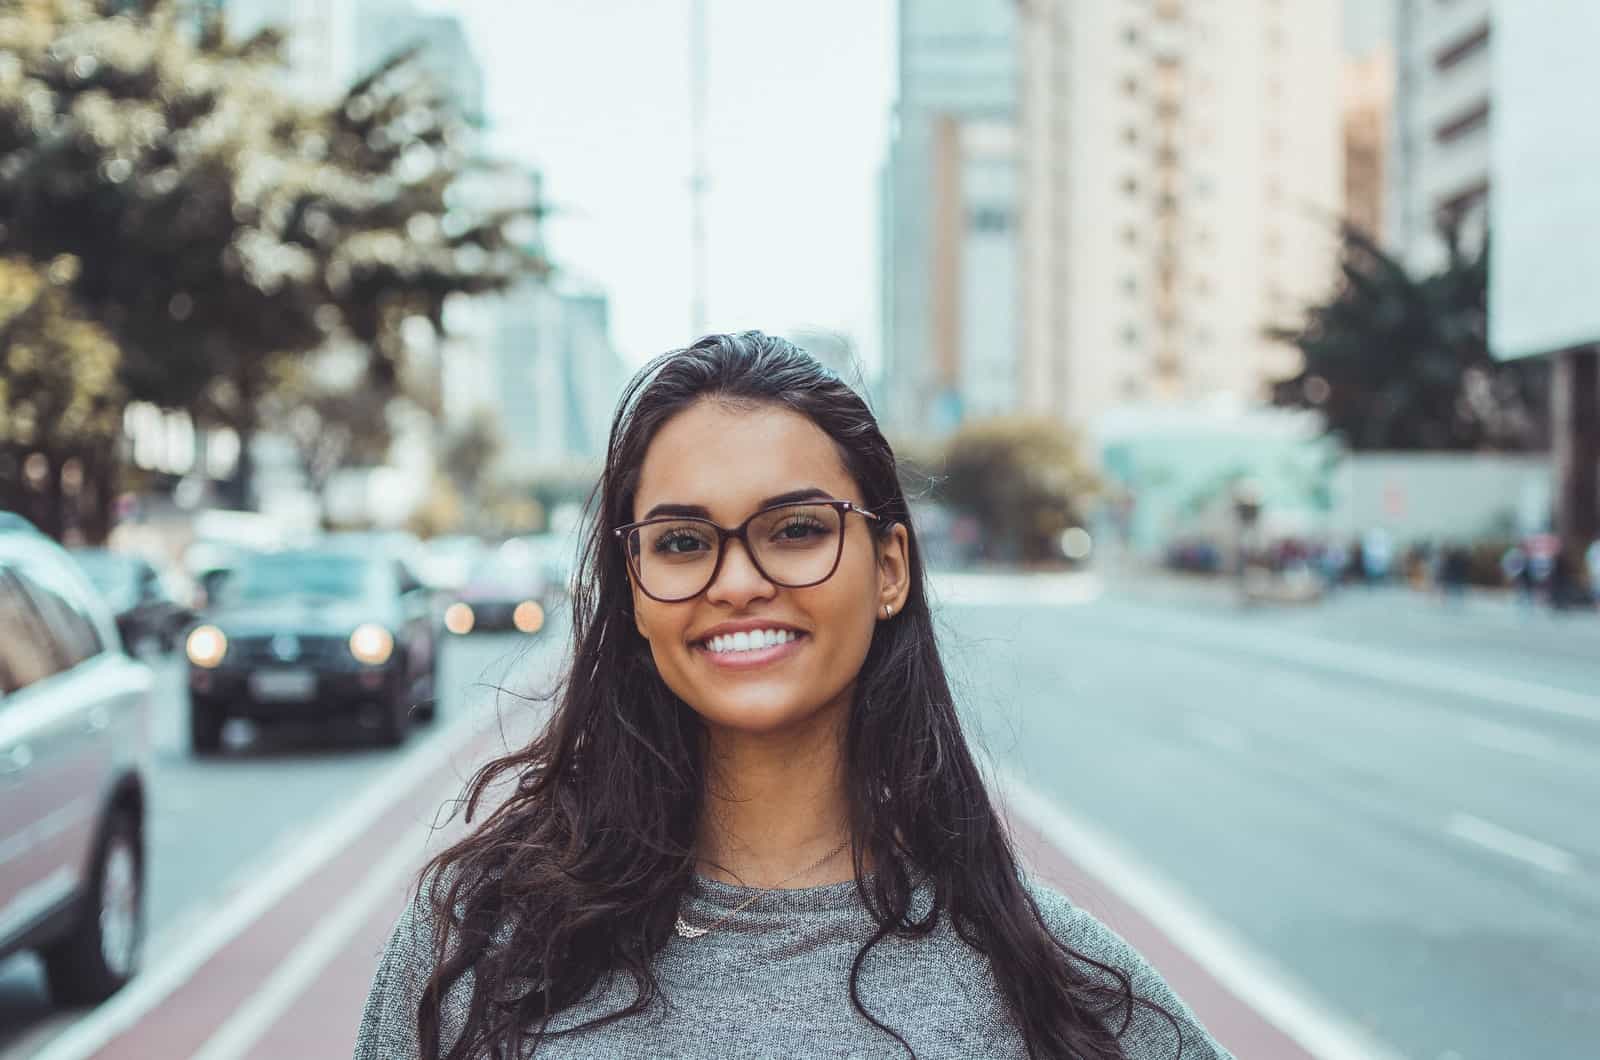 young woman with glasses smiling